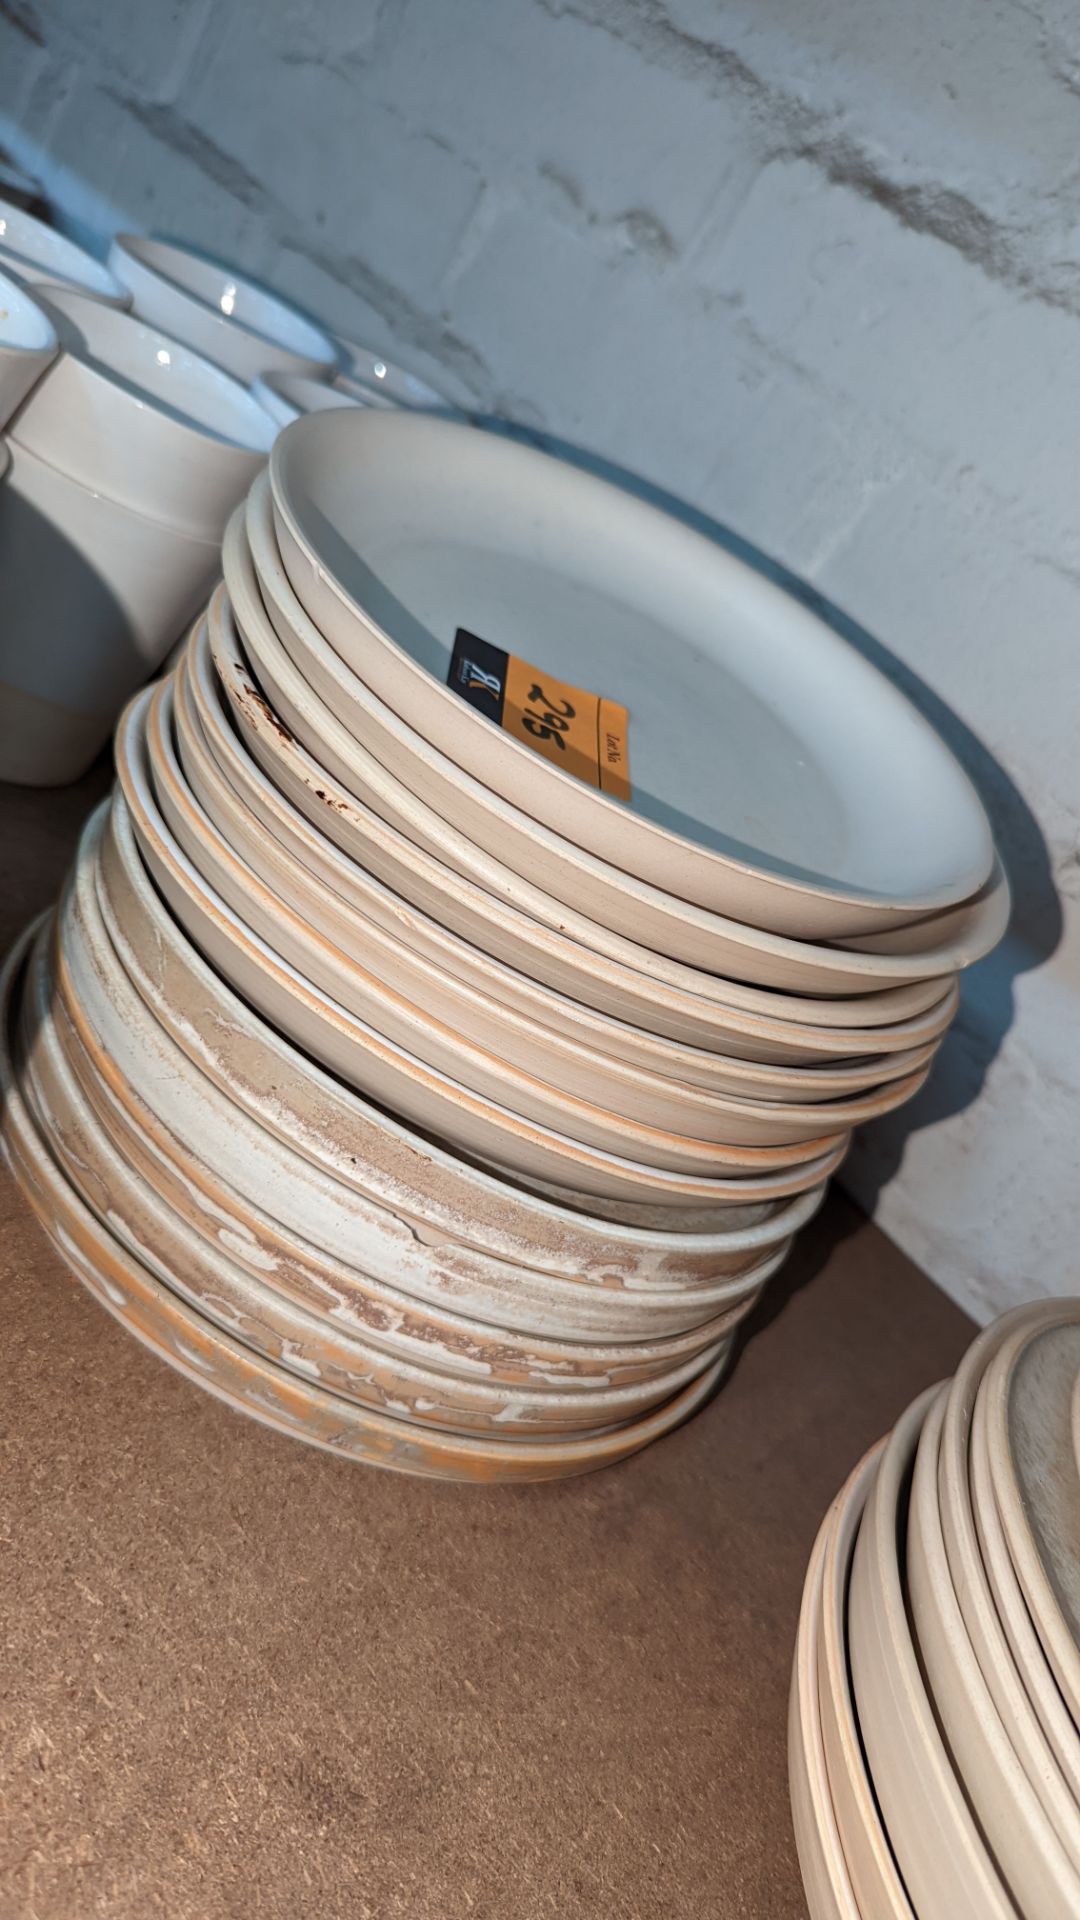 13 off MCC plates with diameters typically around 20cm. NB in a number of slightly different styles